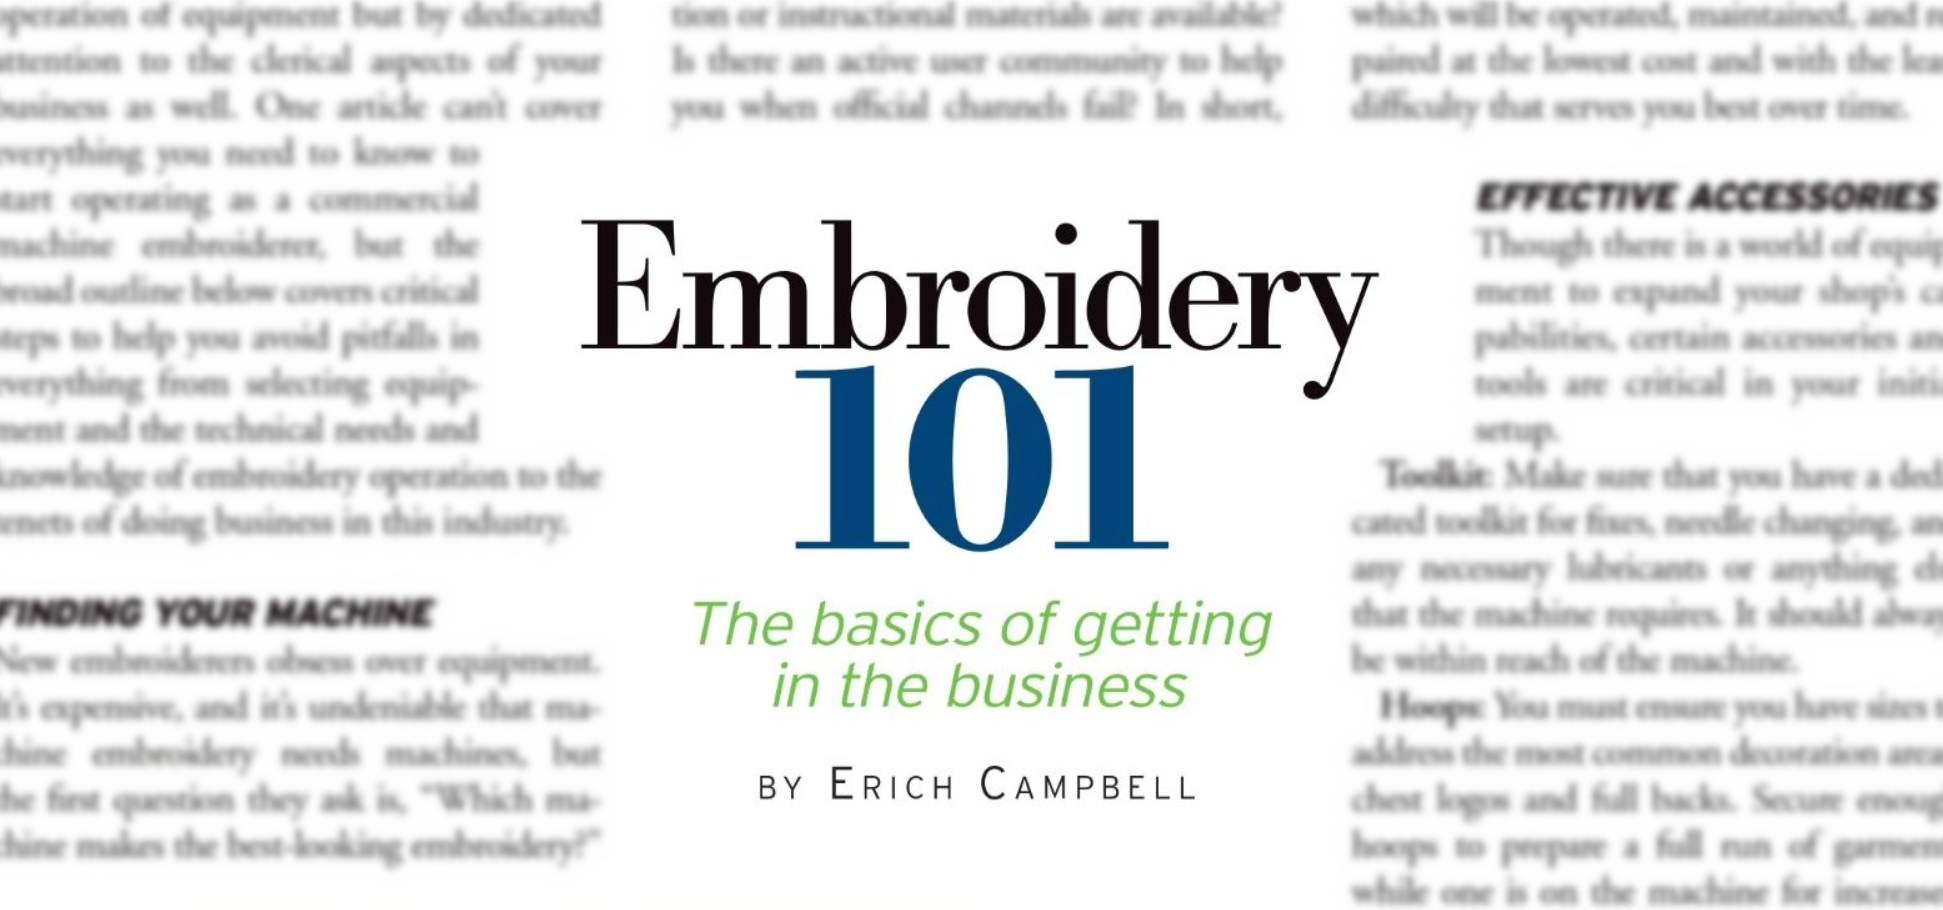 Embroidery Machines 101: How to Use Them and What to Make